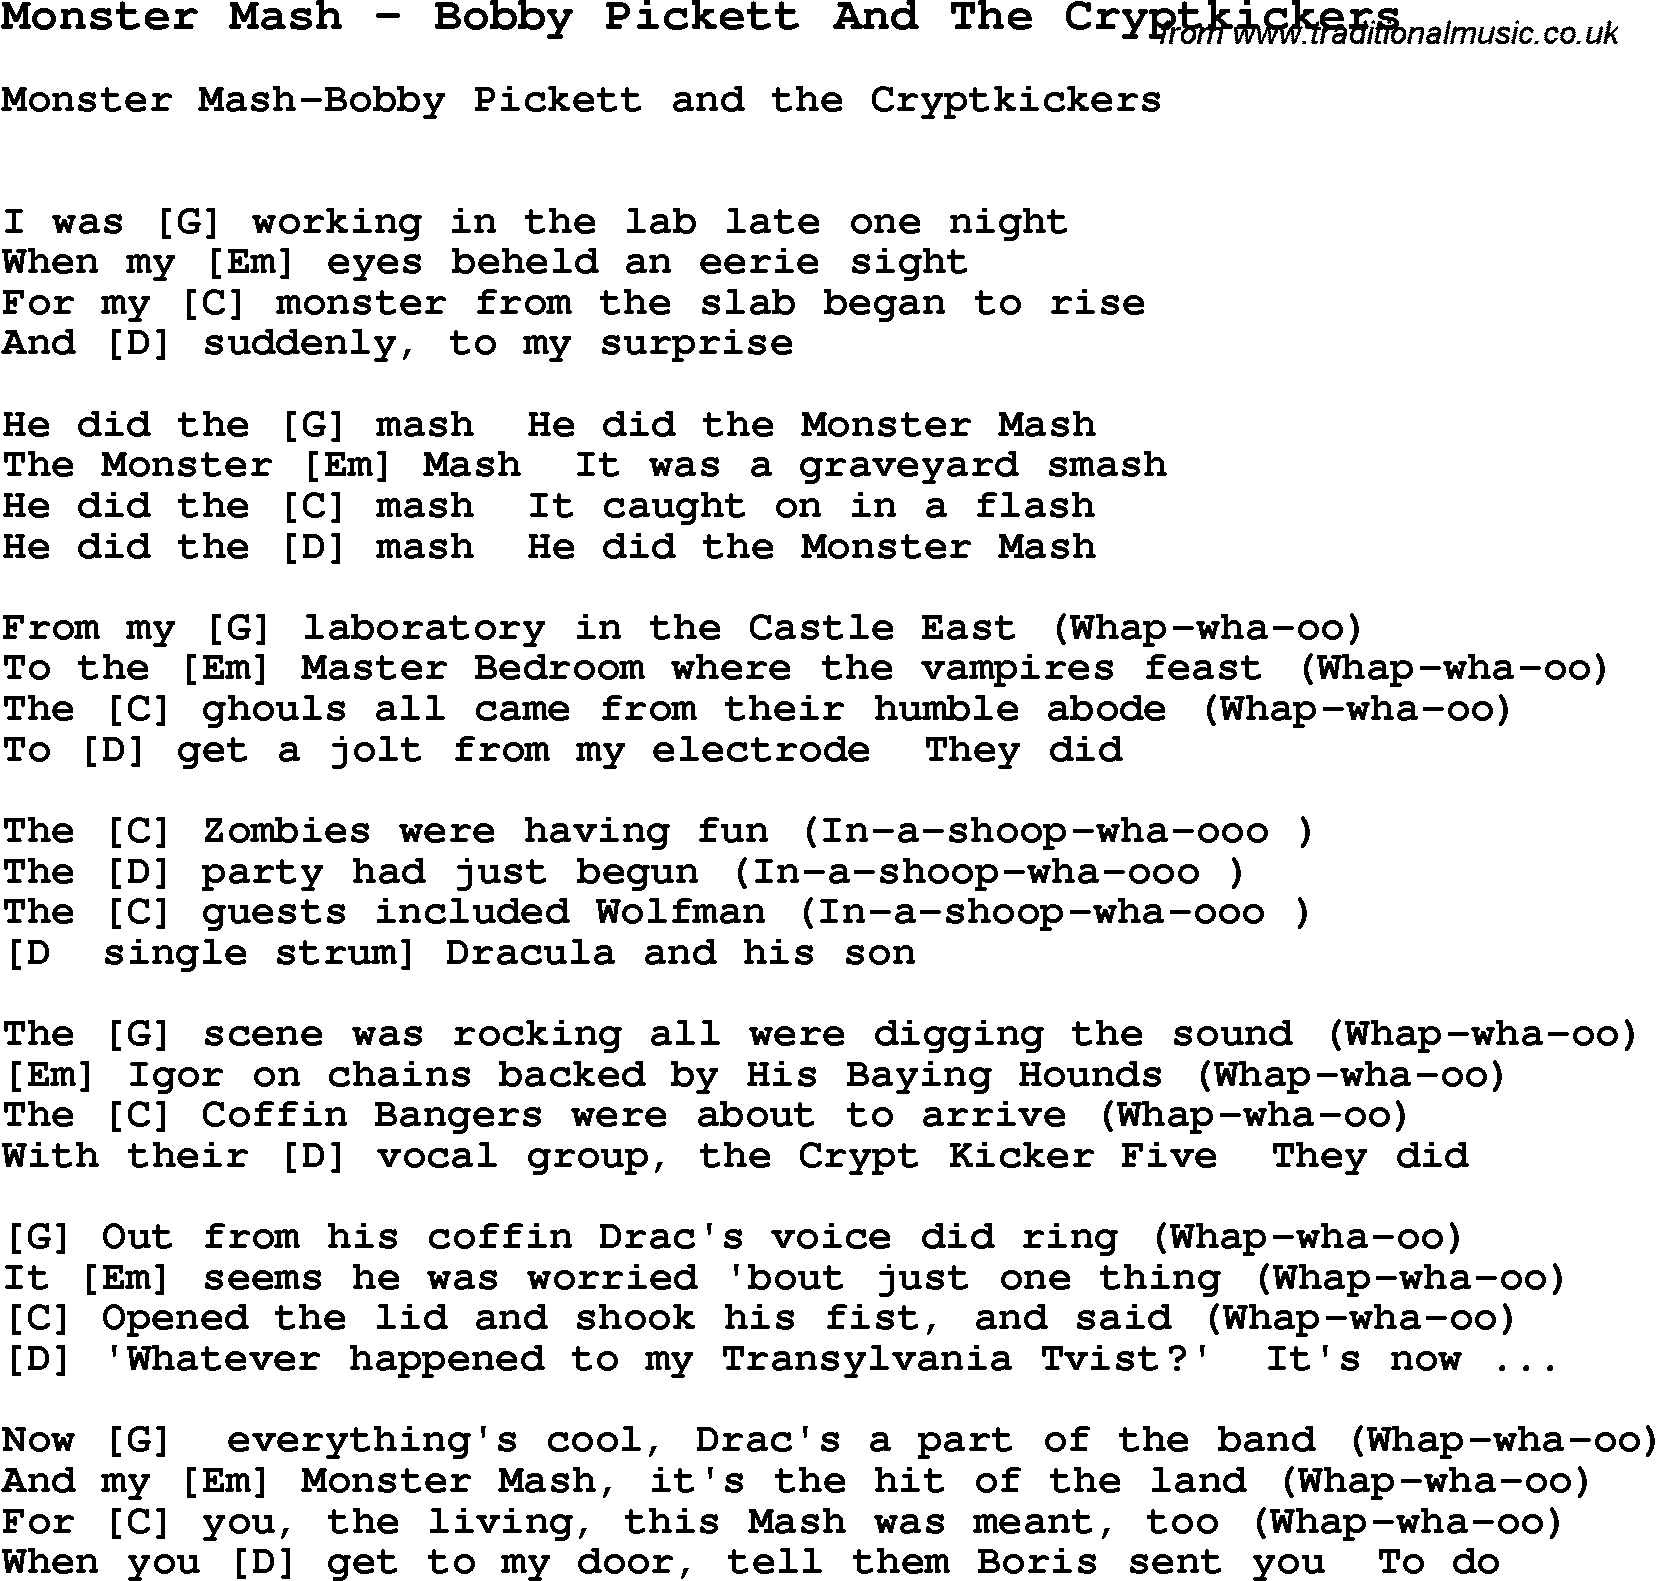 Song Monster Mash by Bobby Pickett And The Cryptkickers, with lyrics for vocal performance and accompaniment chords for Ukulele, Guitar Banjo etc.